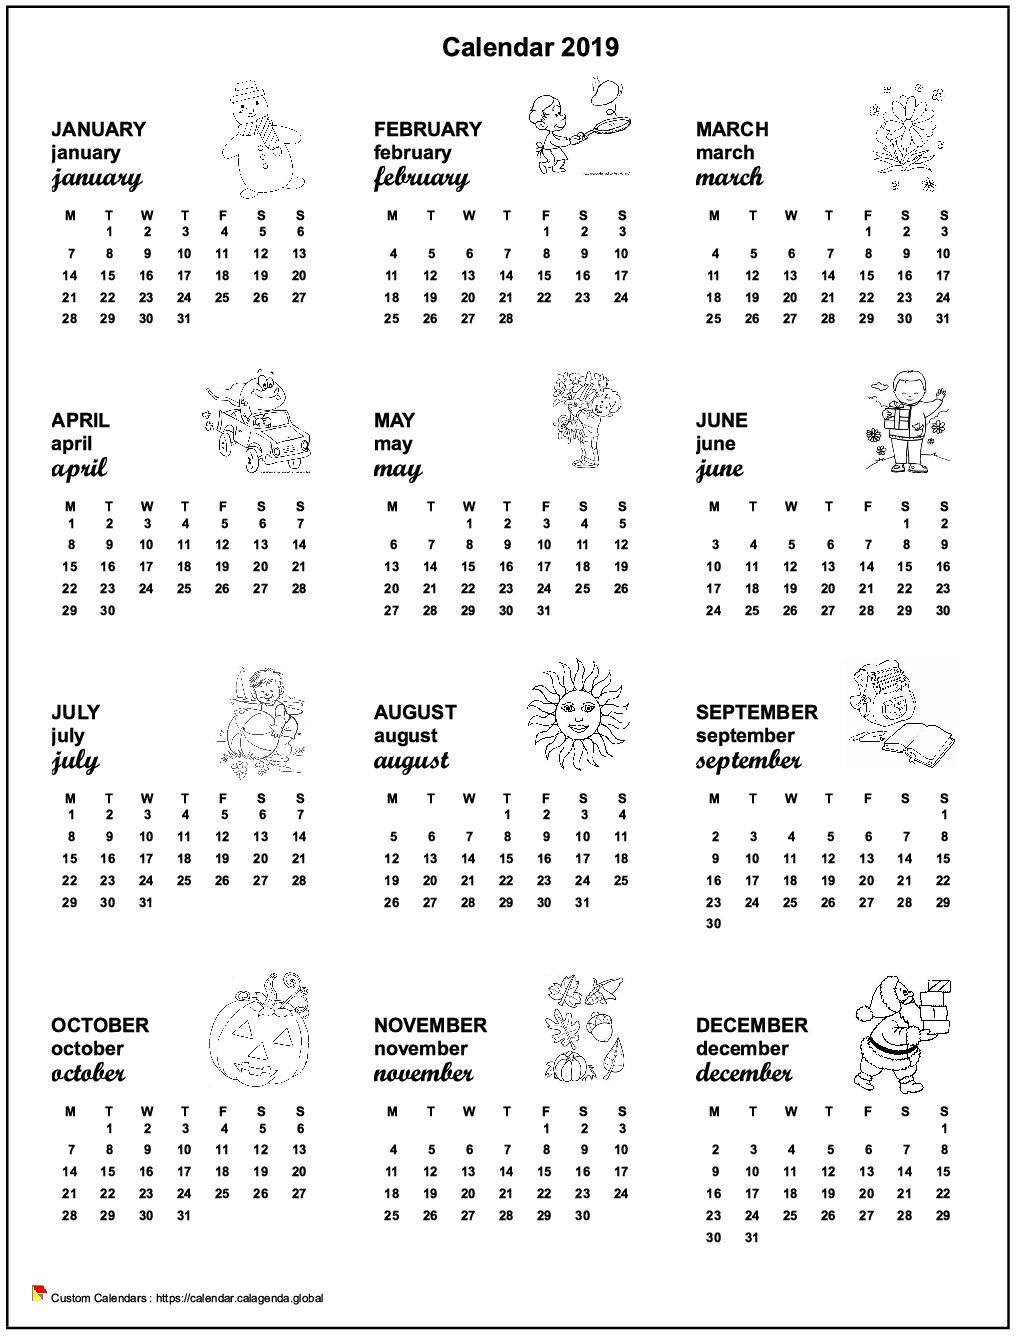 Calendar 2049 annual maternal and primary school